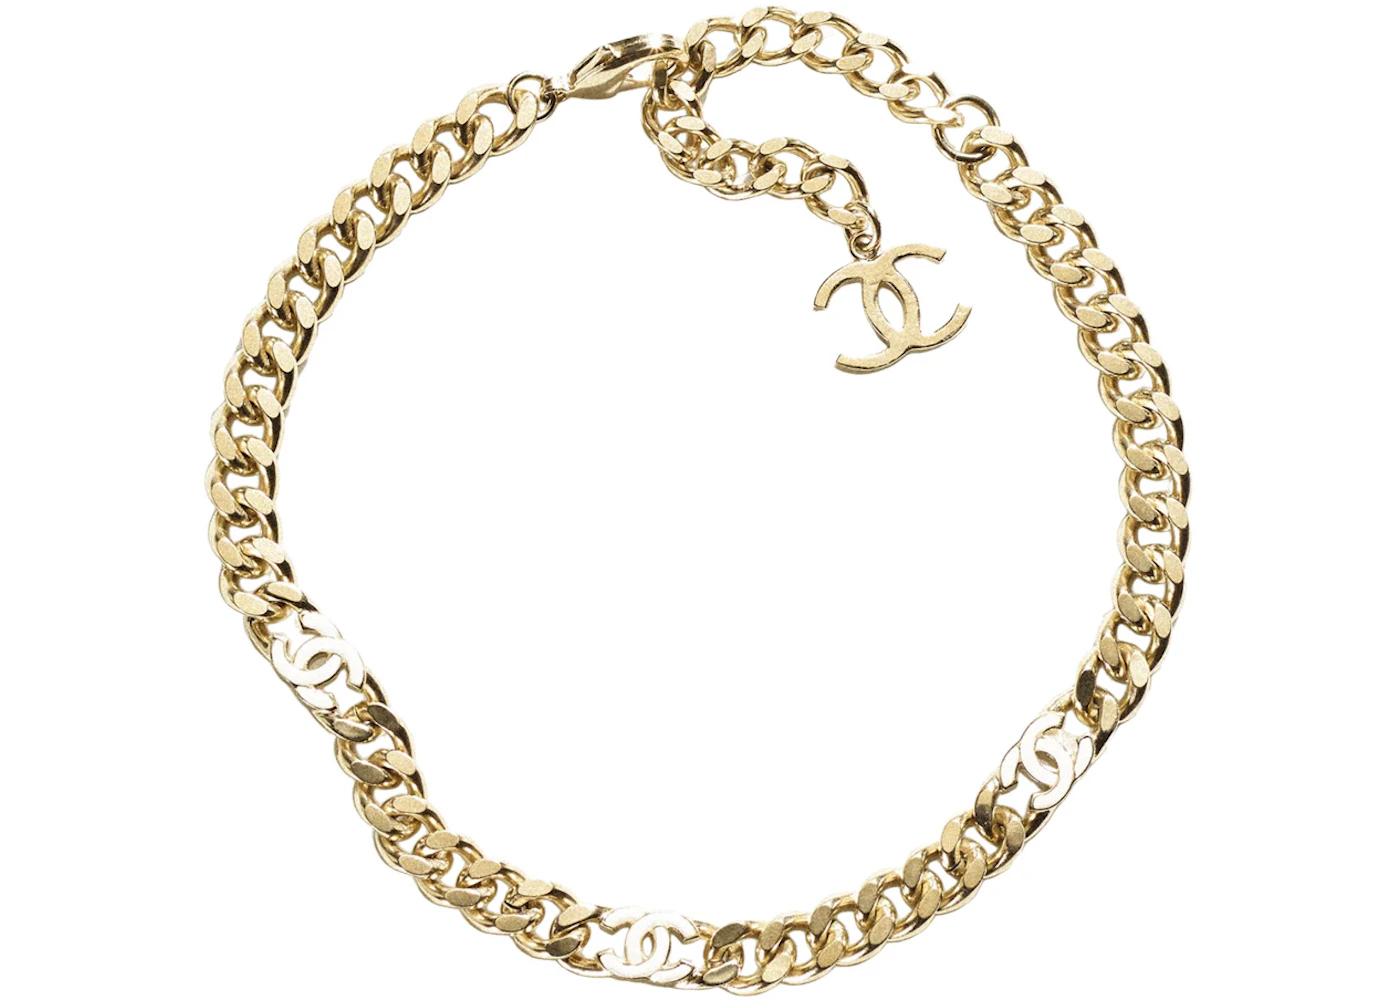 CHANEL, Jewelry, Chanel Thick Pearl Collar Necklace